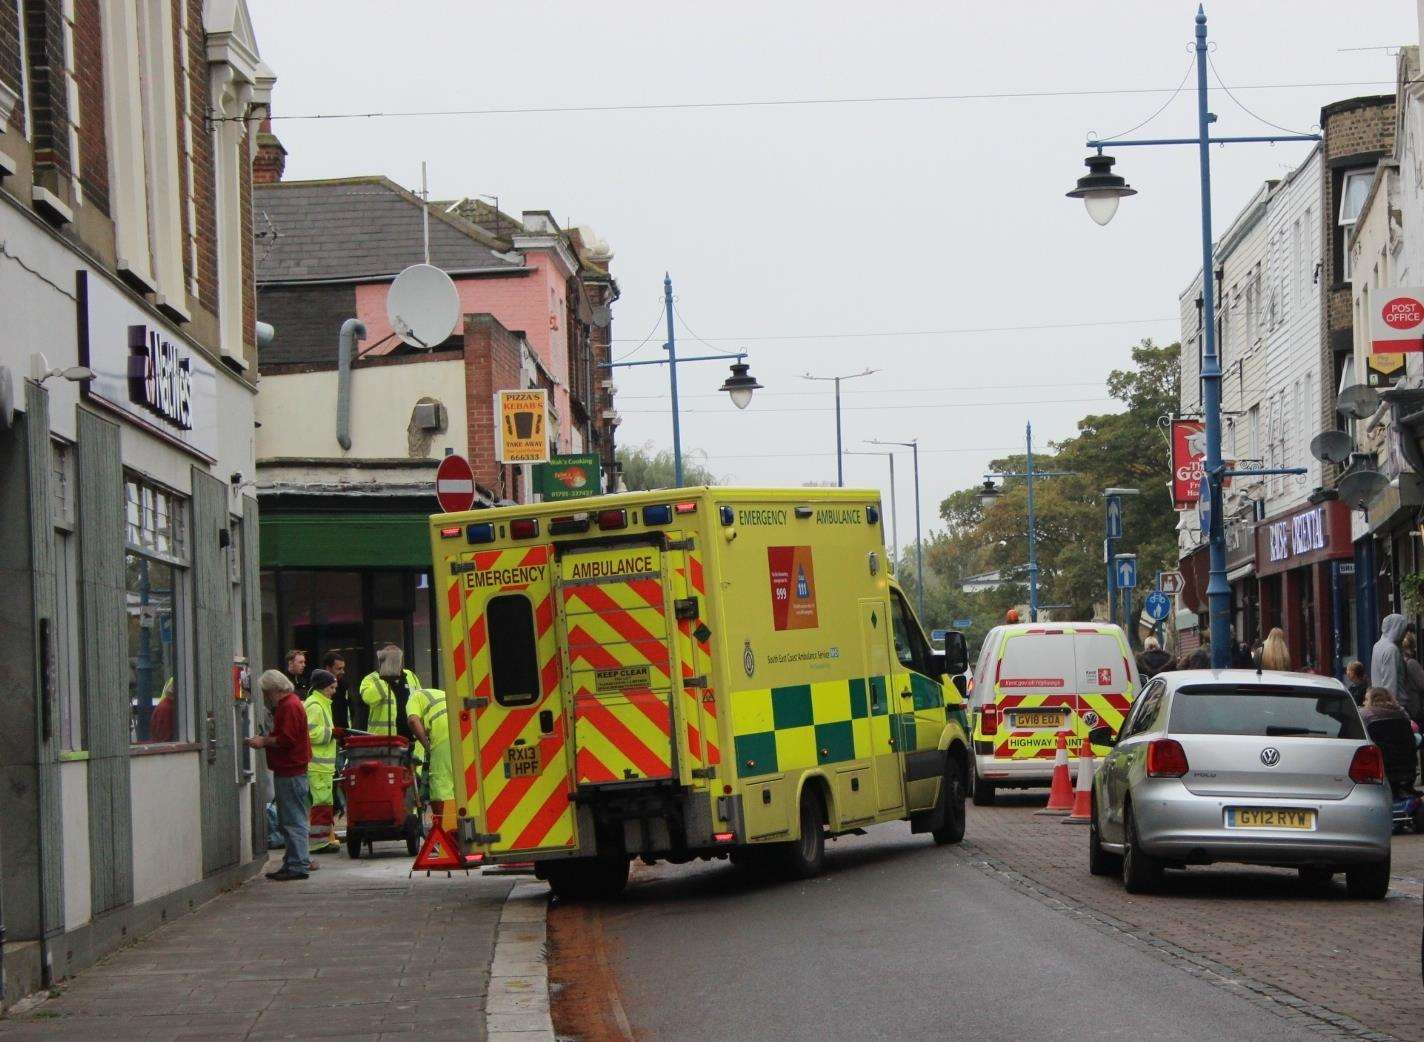 Susan Bidgood being taken away by ambulance after slipping on oil in Sheerness High Street